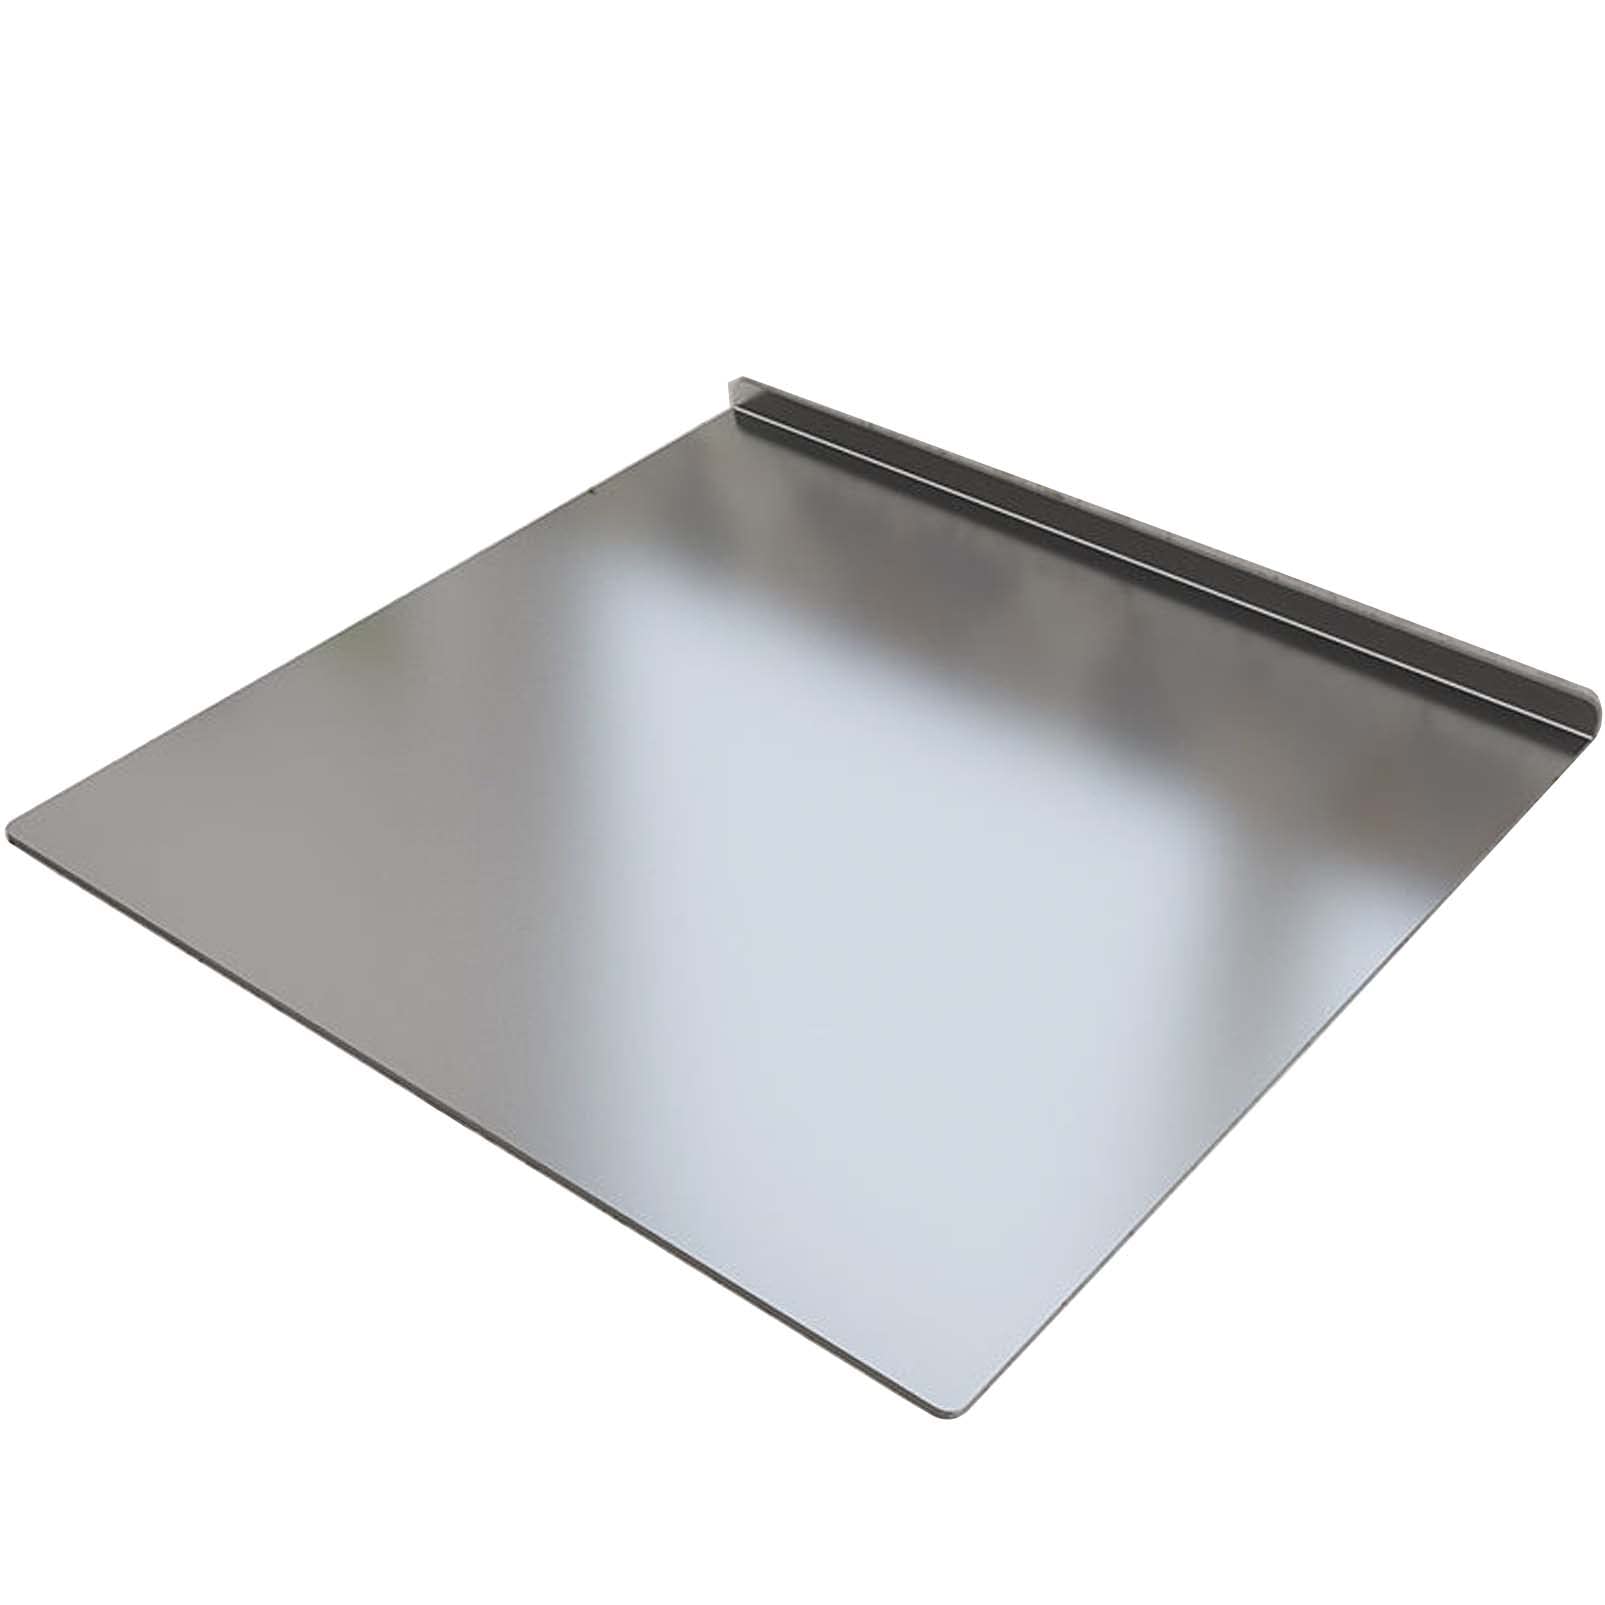 Chopping Board Made of 304 Stainless Steel on Both Sides Professional Kitchen Worktop Pasta Board Non-Stick Coating Extra Large Cutting Mats for Meat Vegetable Bread (22.8*23.6in(58*60cm),Thick:2mm)